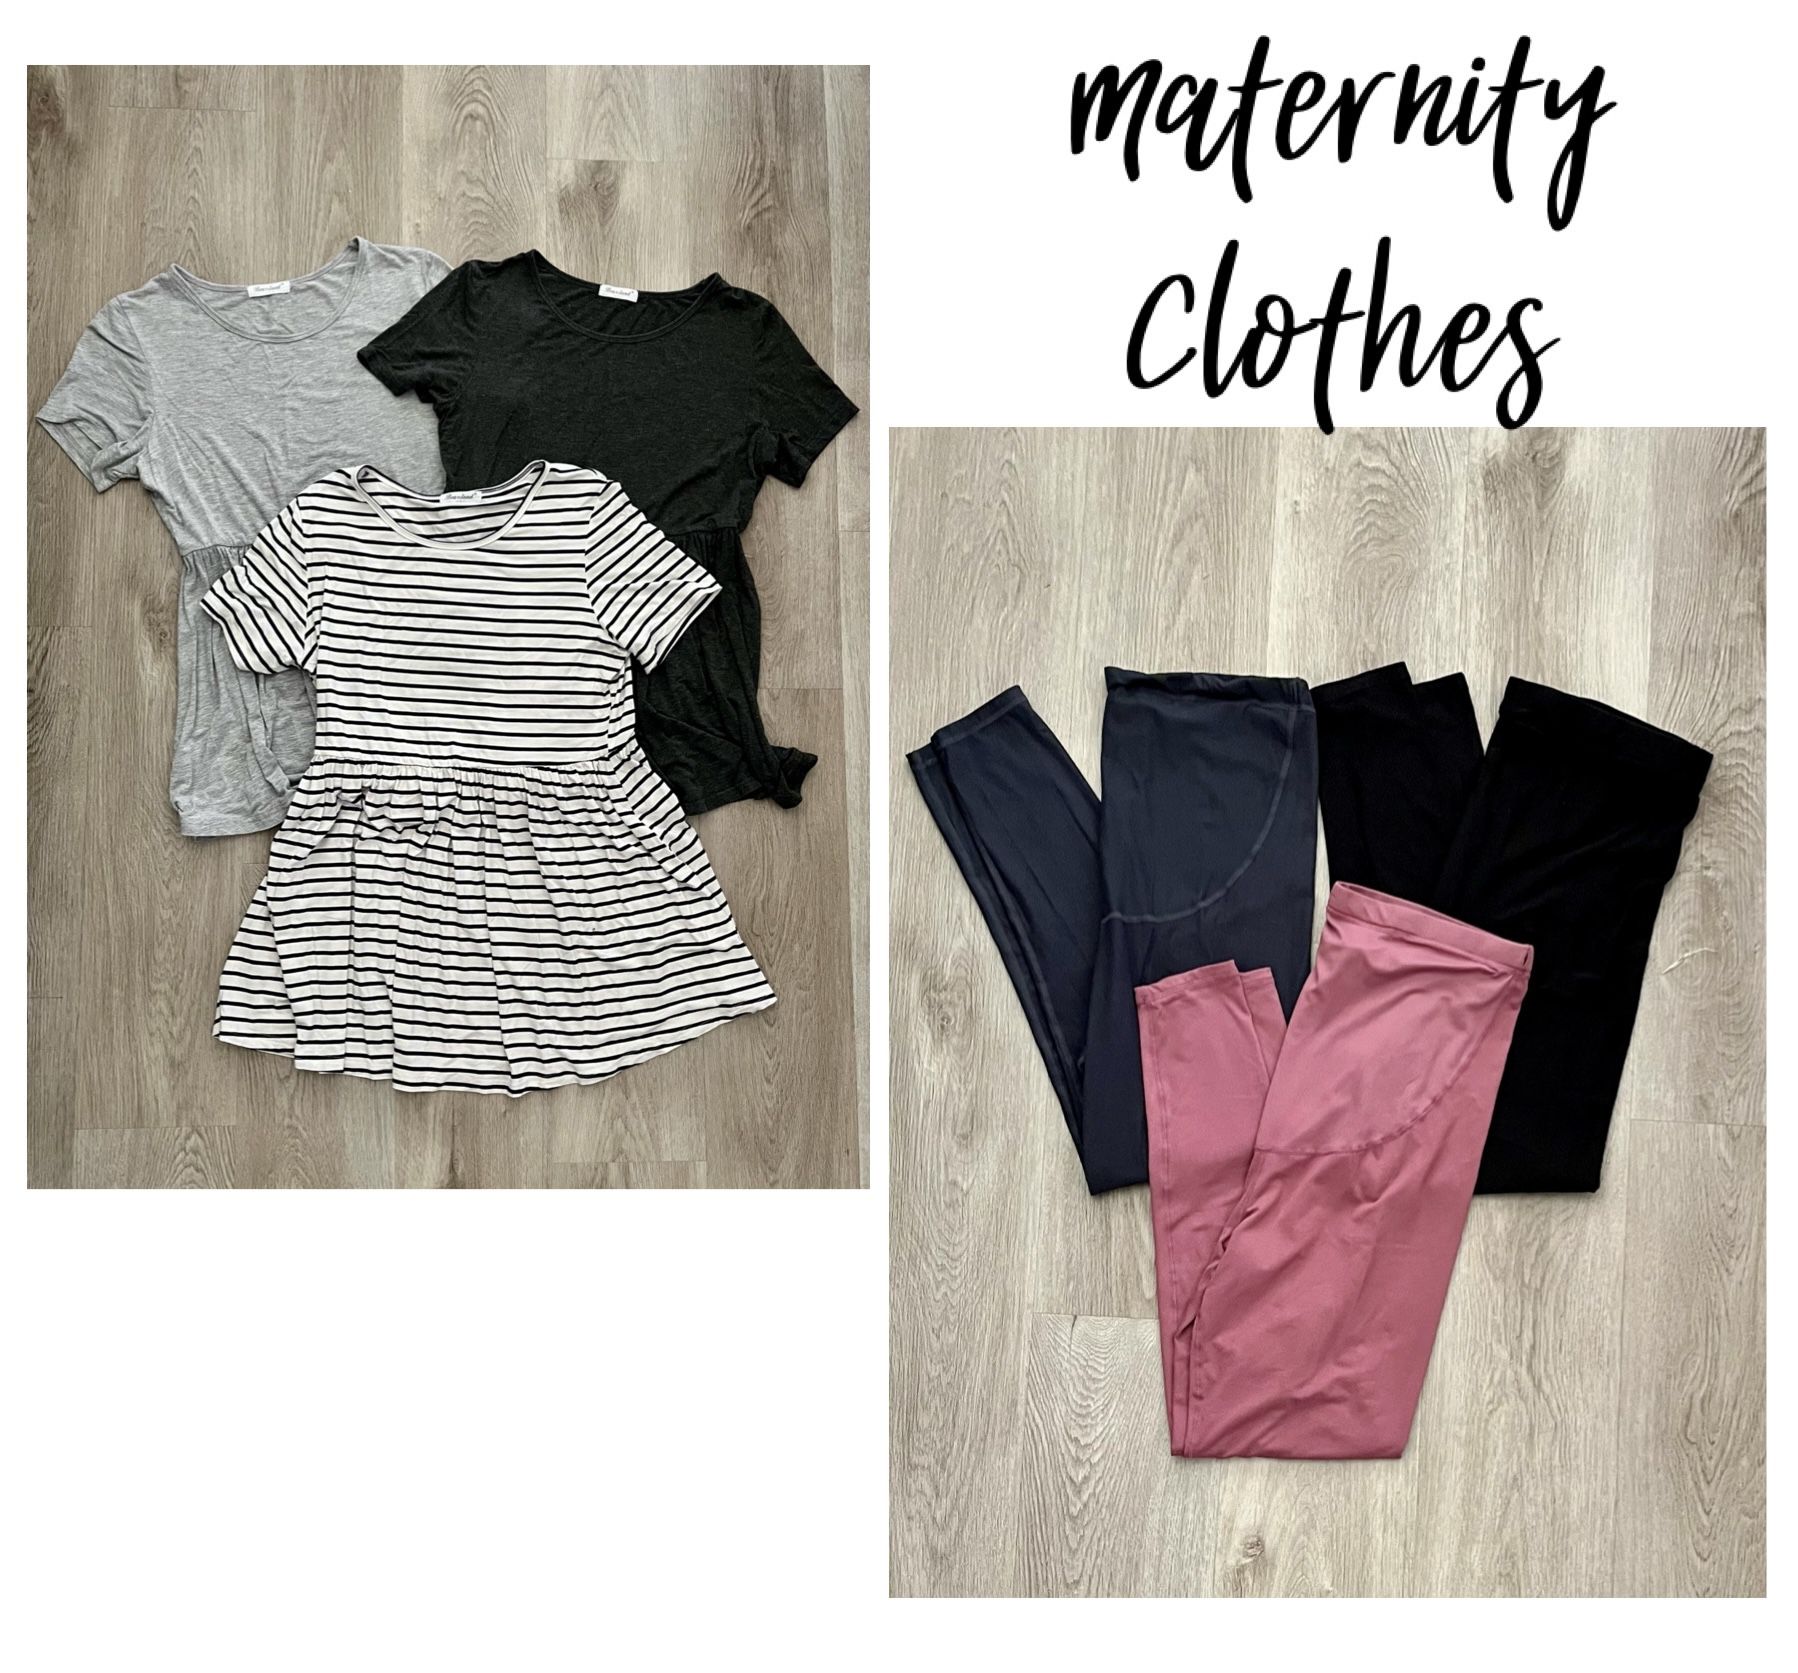 GREAT DEAL on Maternity Clothes